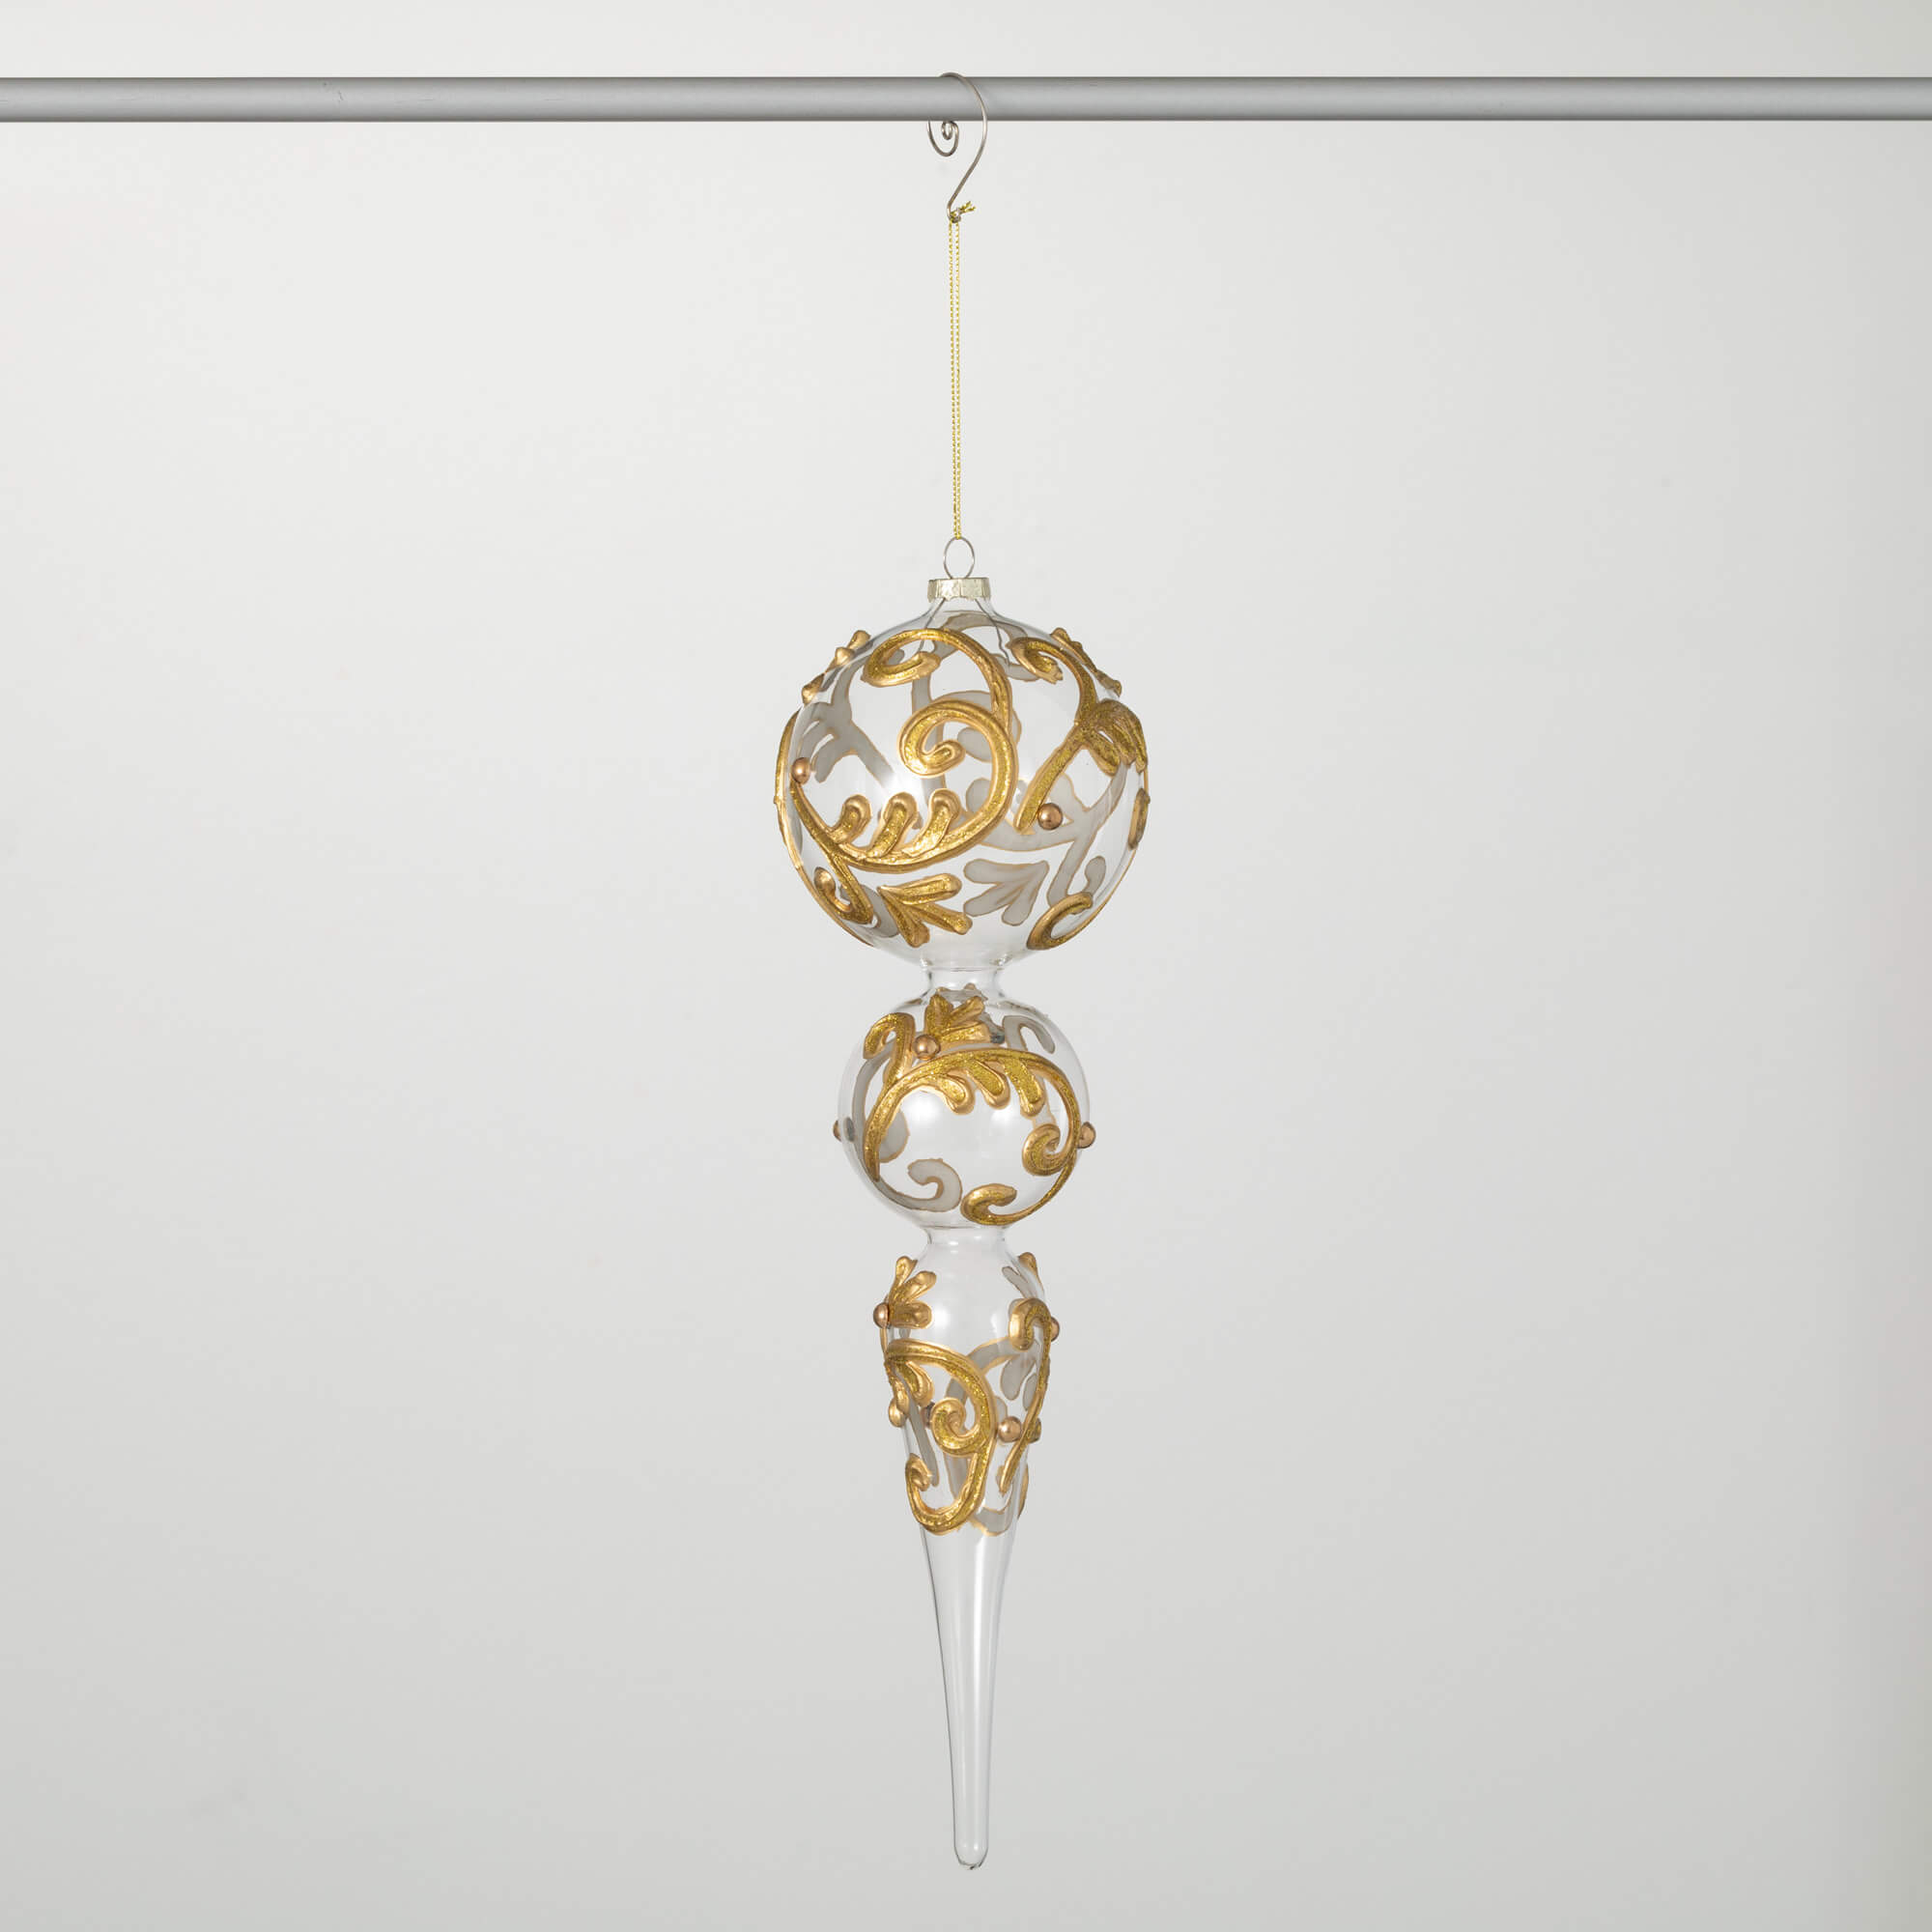 ENCRUSTED GOLD FINIAL ORNAMENT